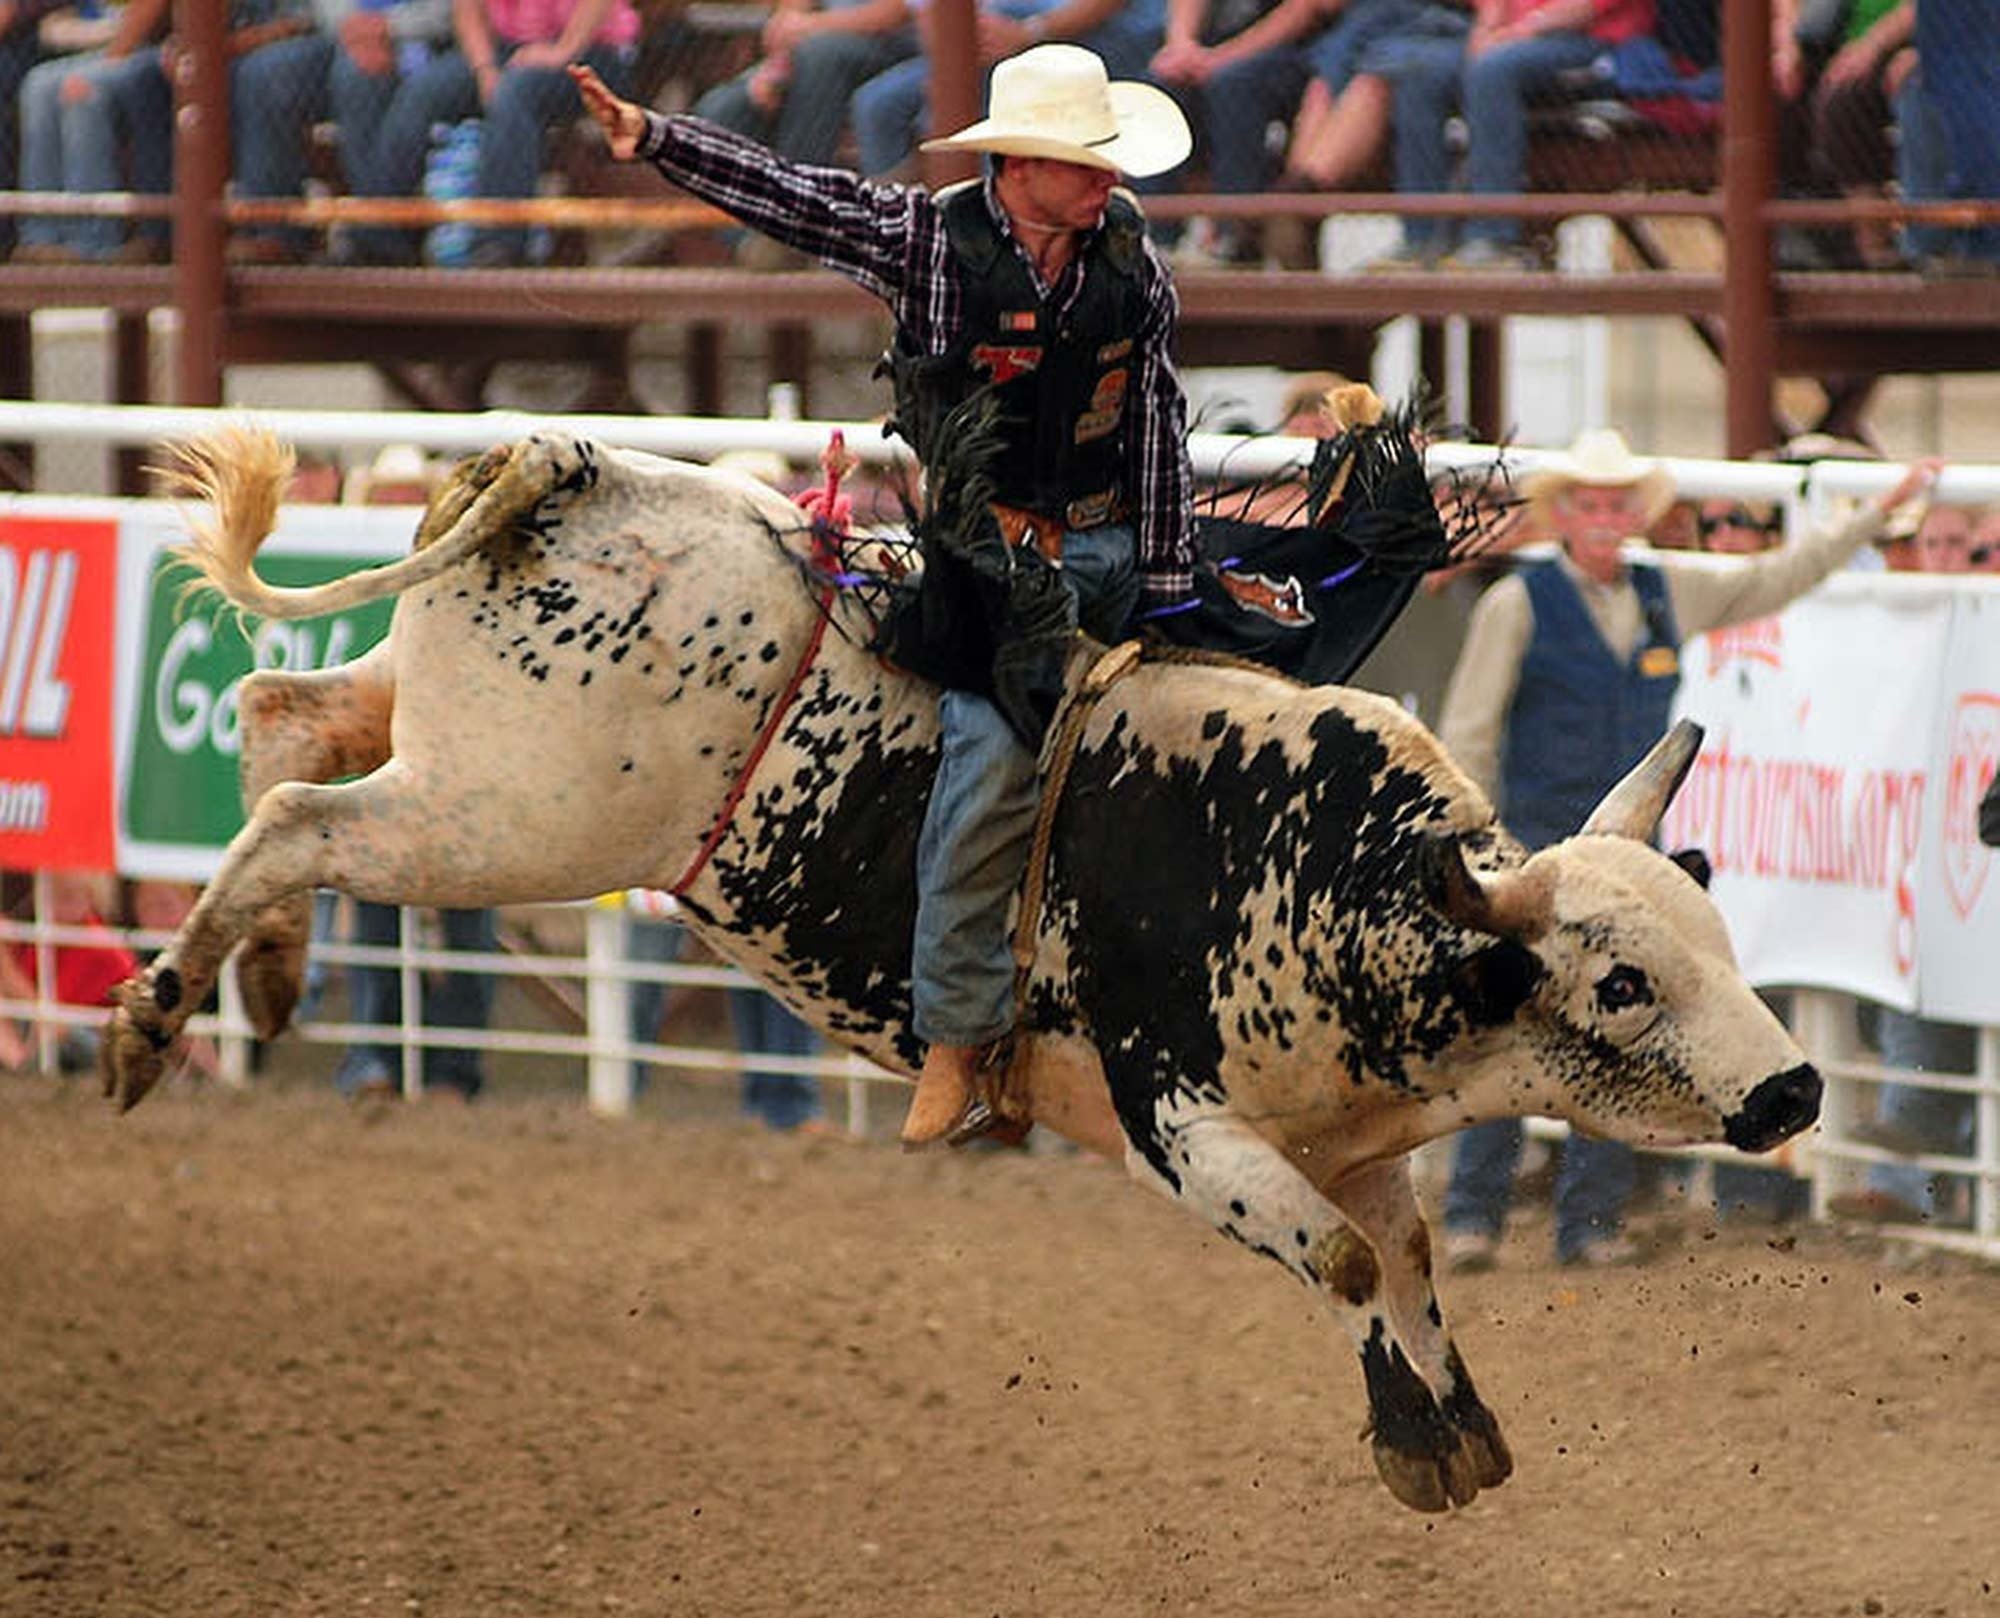 Bullriding: A rodeo sport in which the rider tries to hold on to a bucking bull, Pro bullfighter, Man riding a bull. 2000x1620 HD Wallpaper.